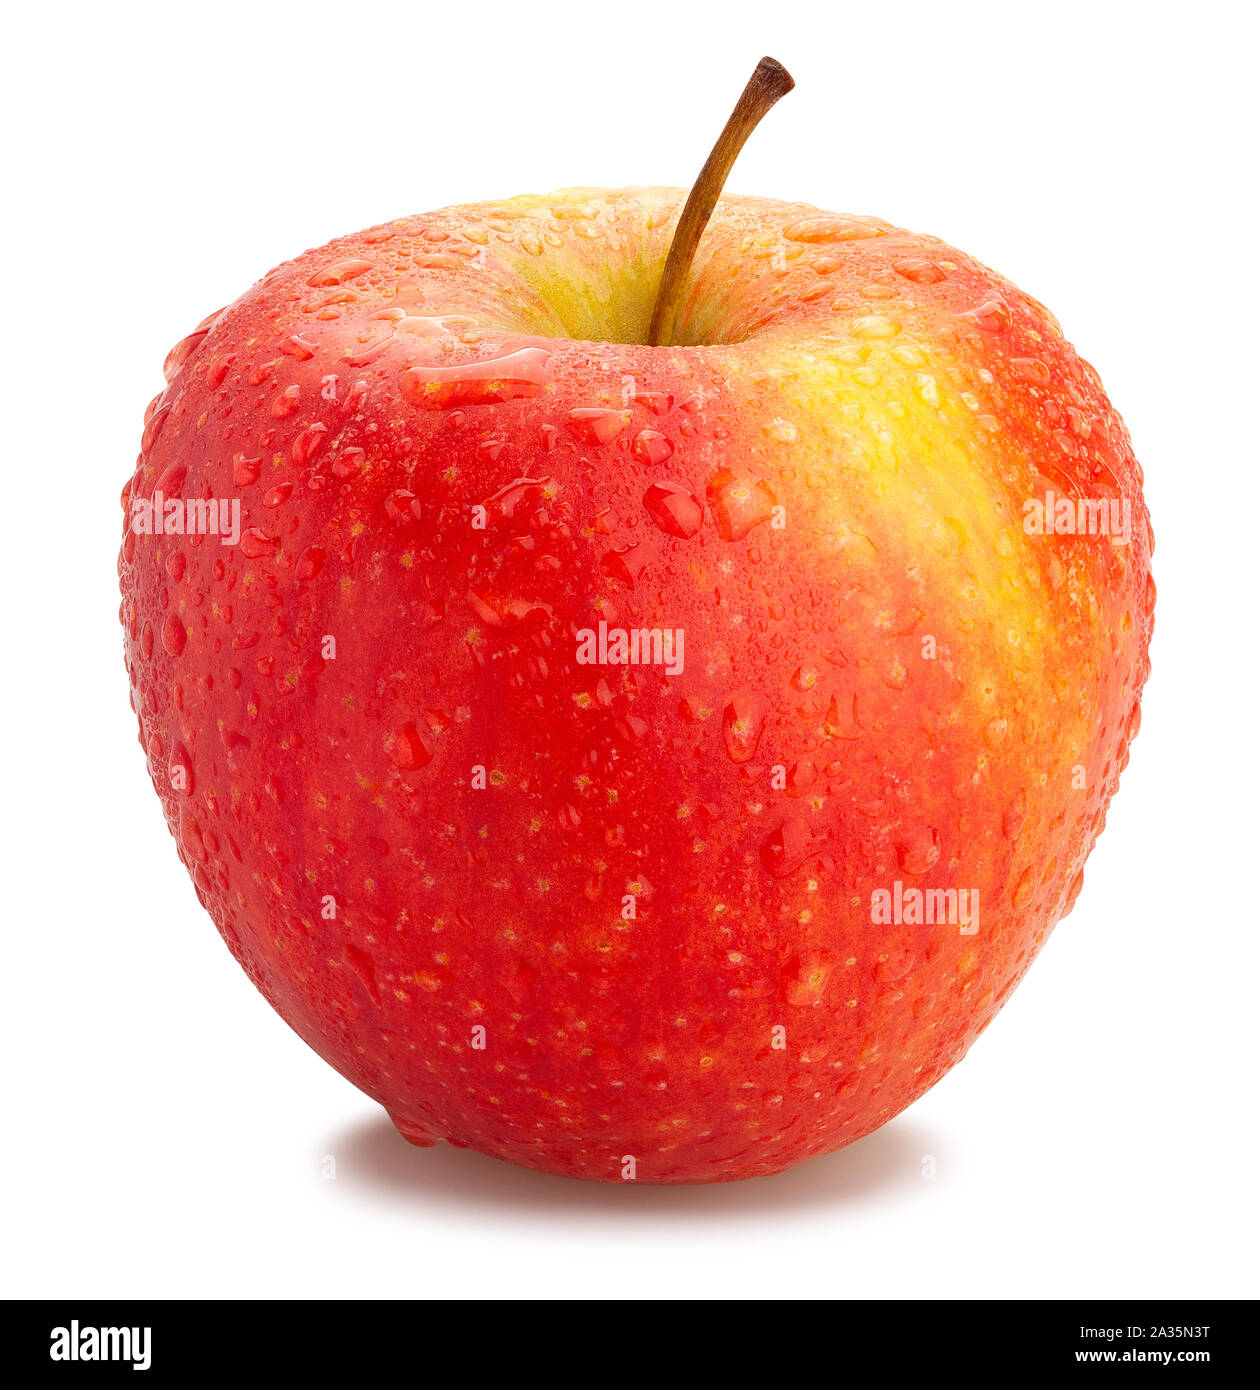 red yellow apples path isolated on white Stock Photo